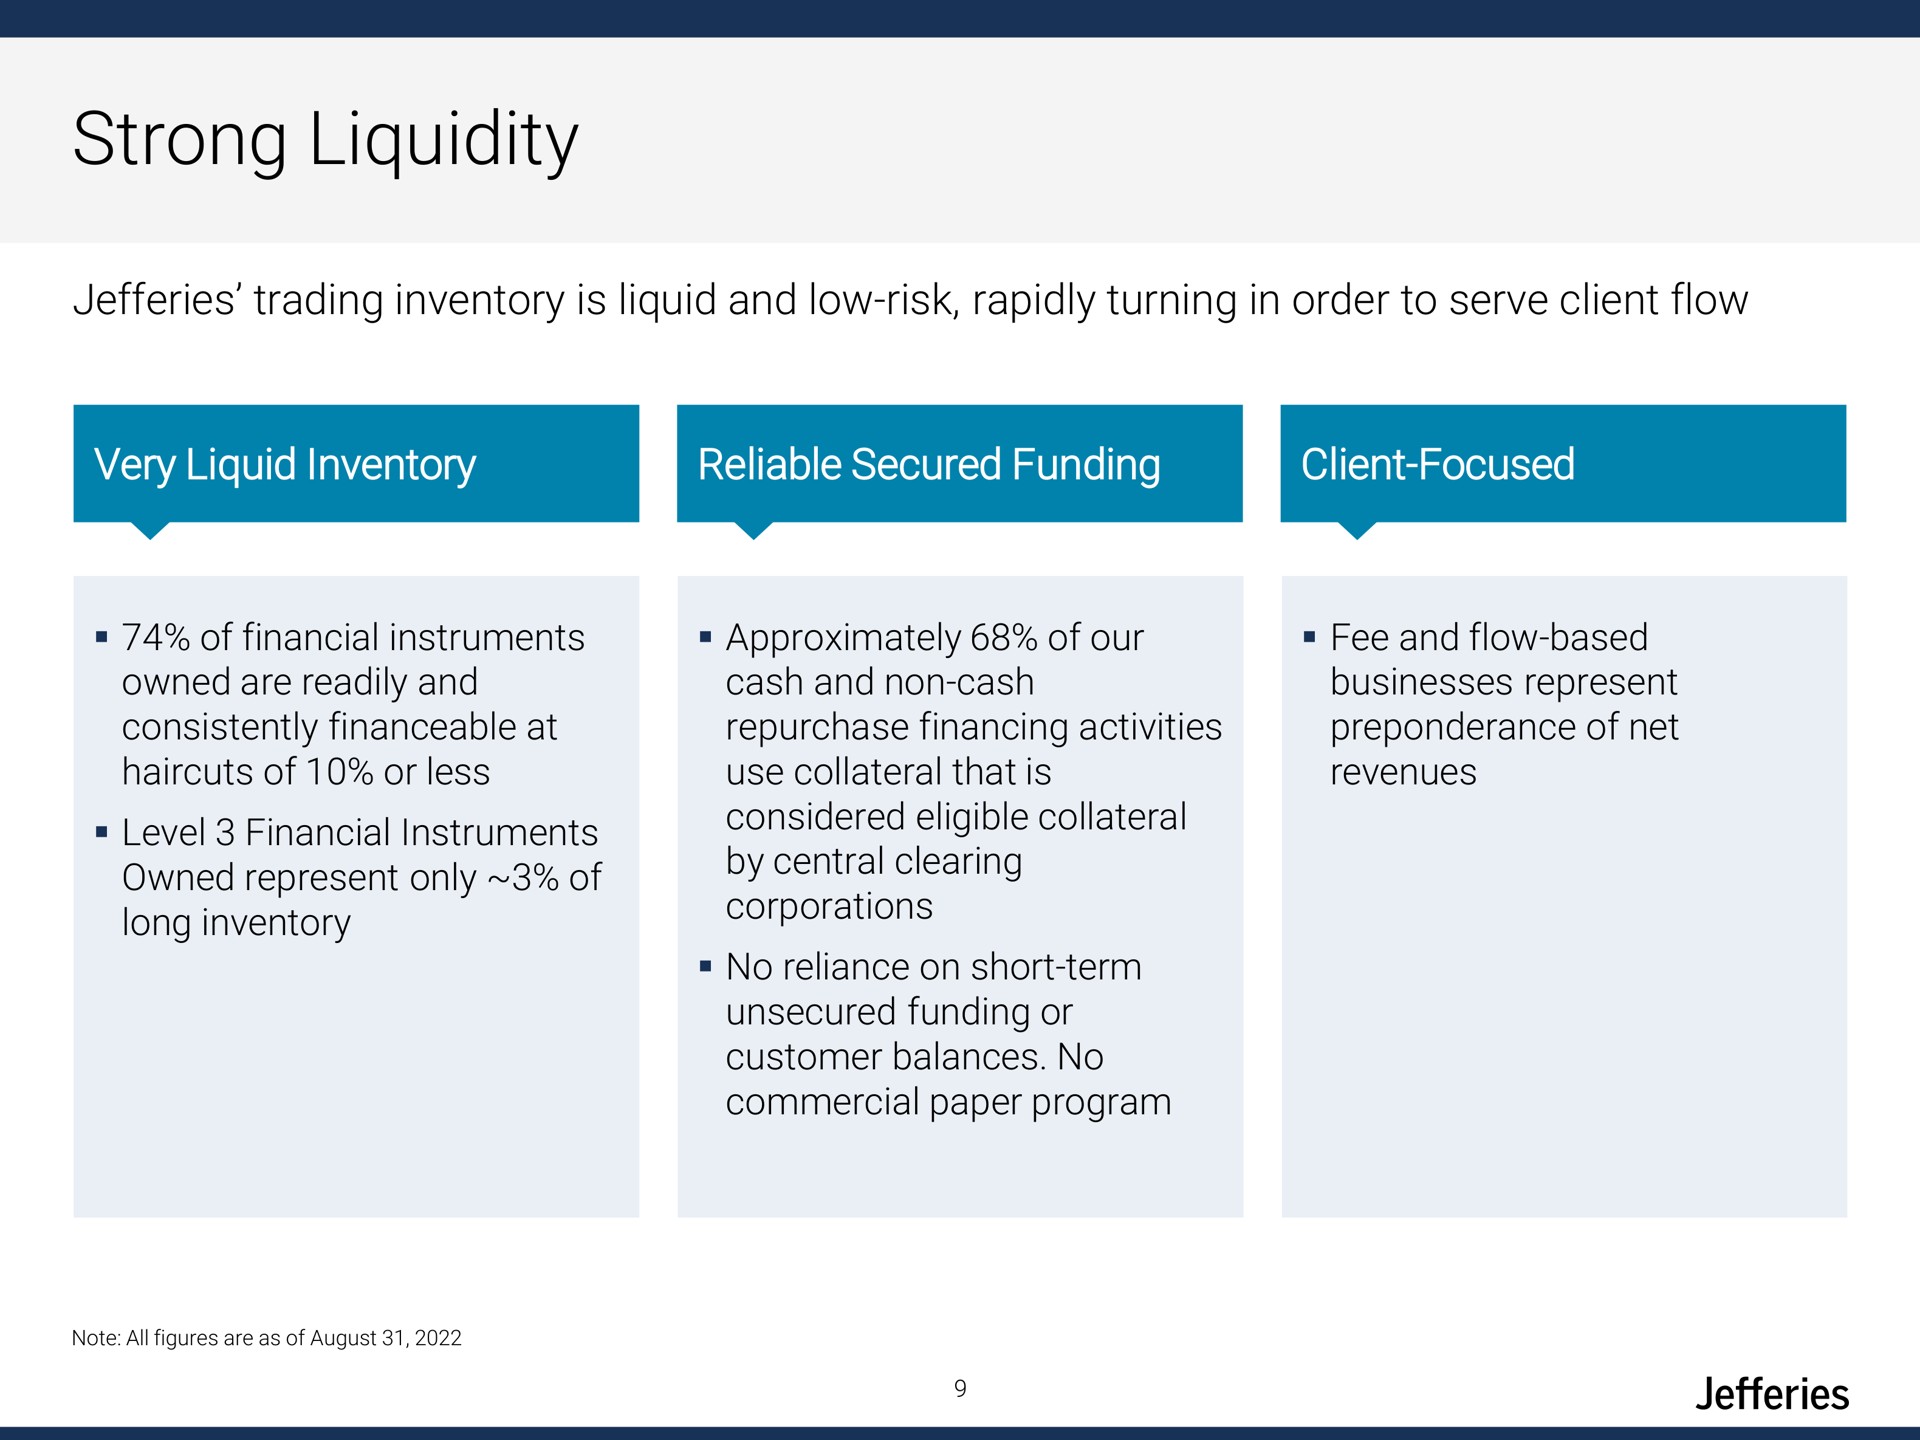 strong liquidity | Jefferies Financial Group